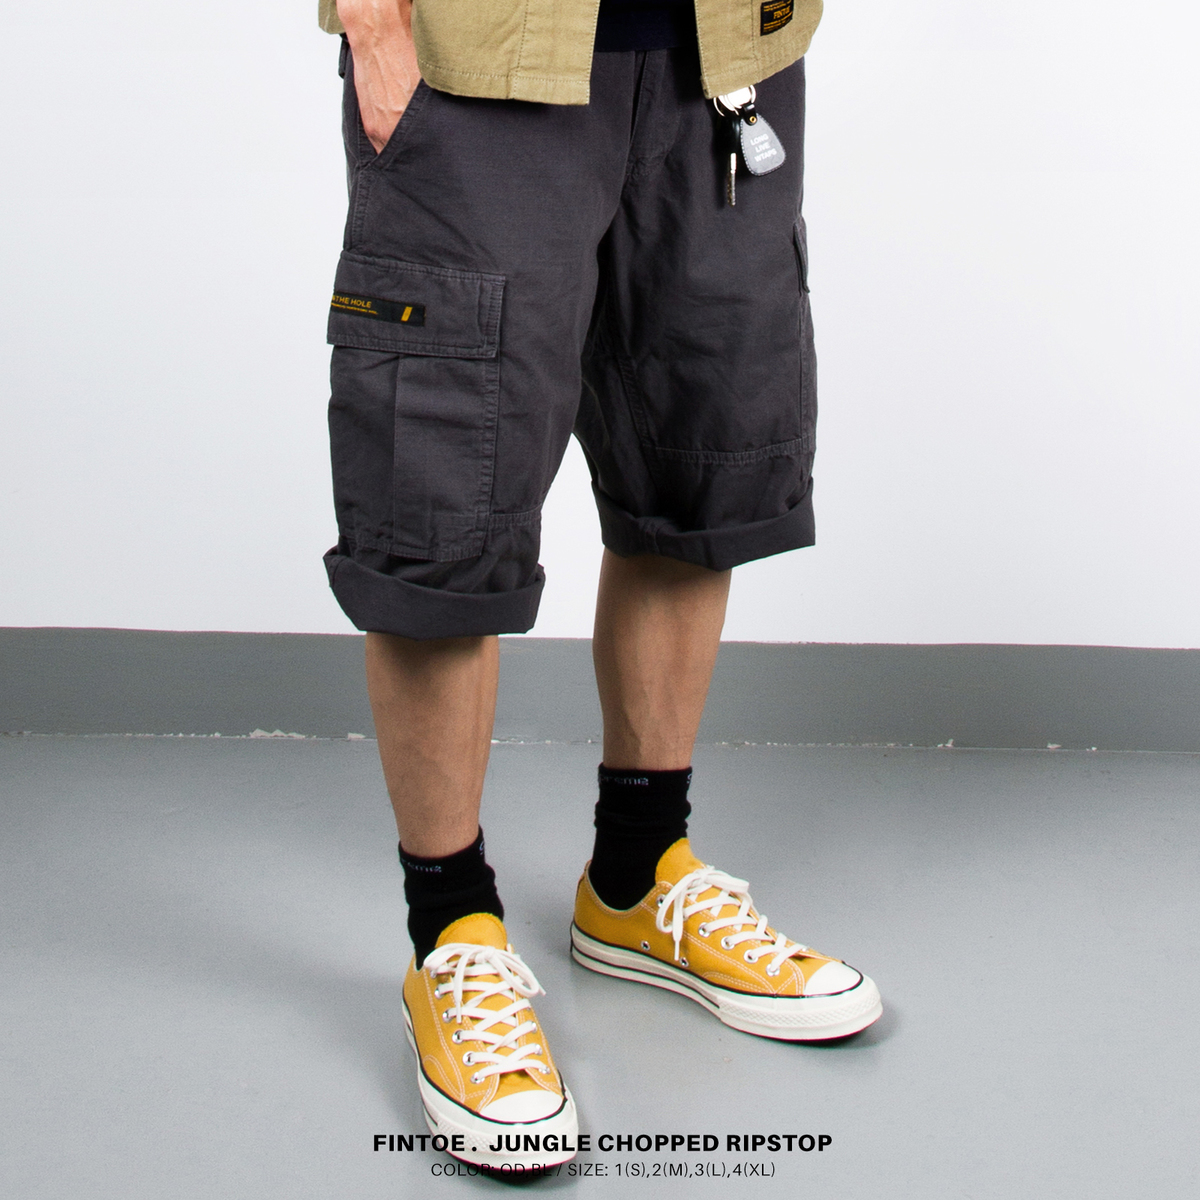 WTAPS JUNGLE SHORTS S BLACK | www.kinderpartys.at